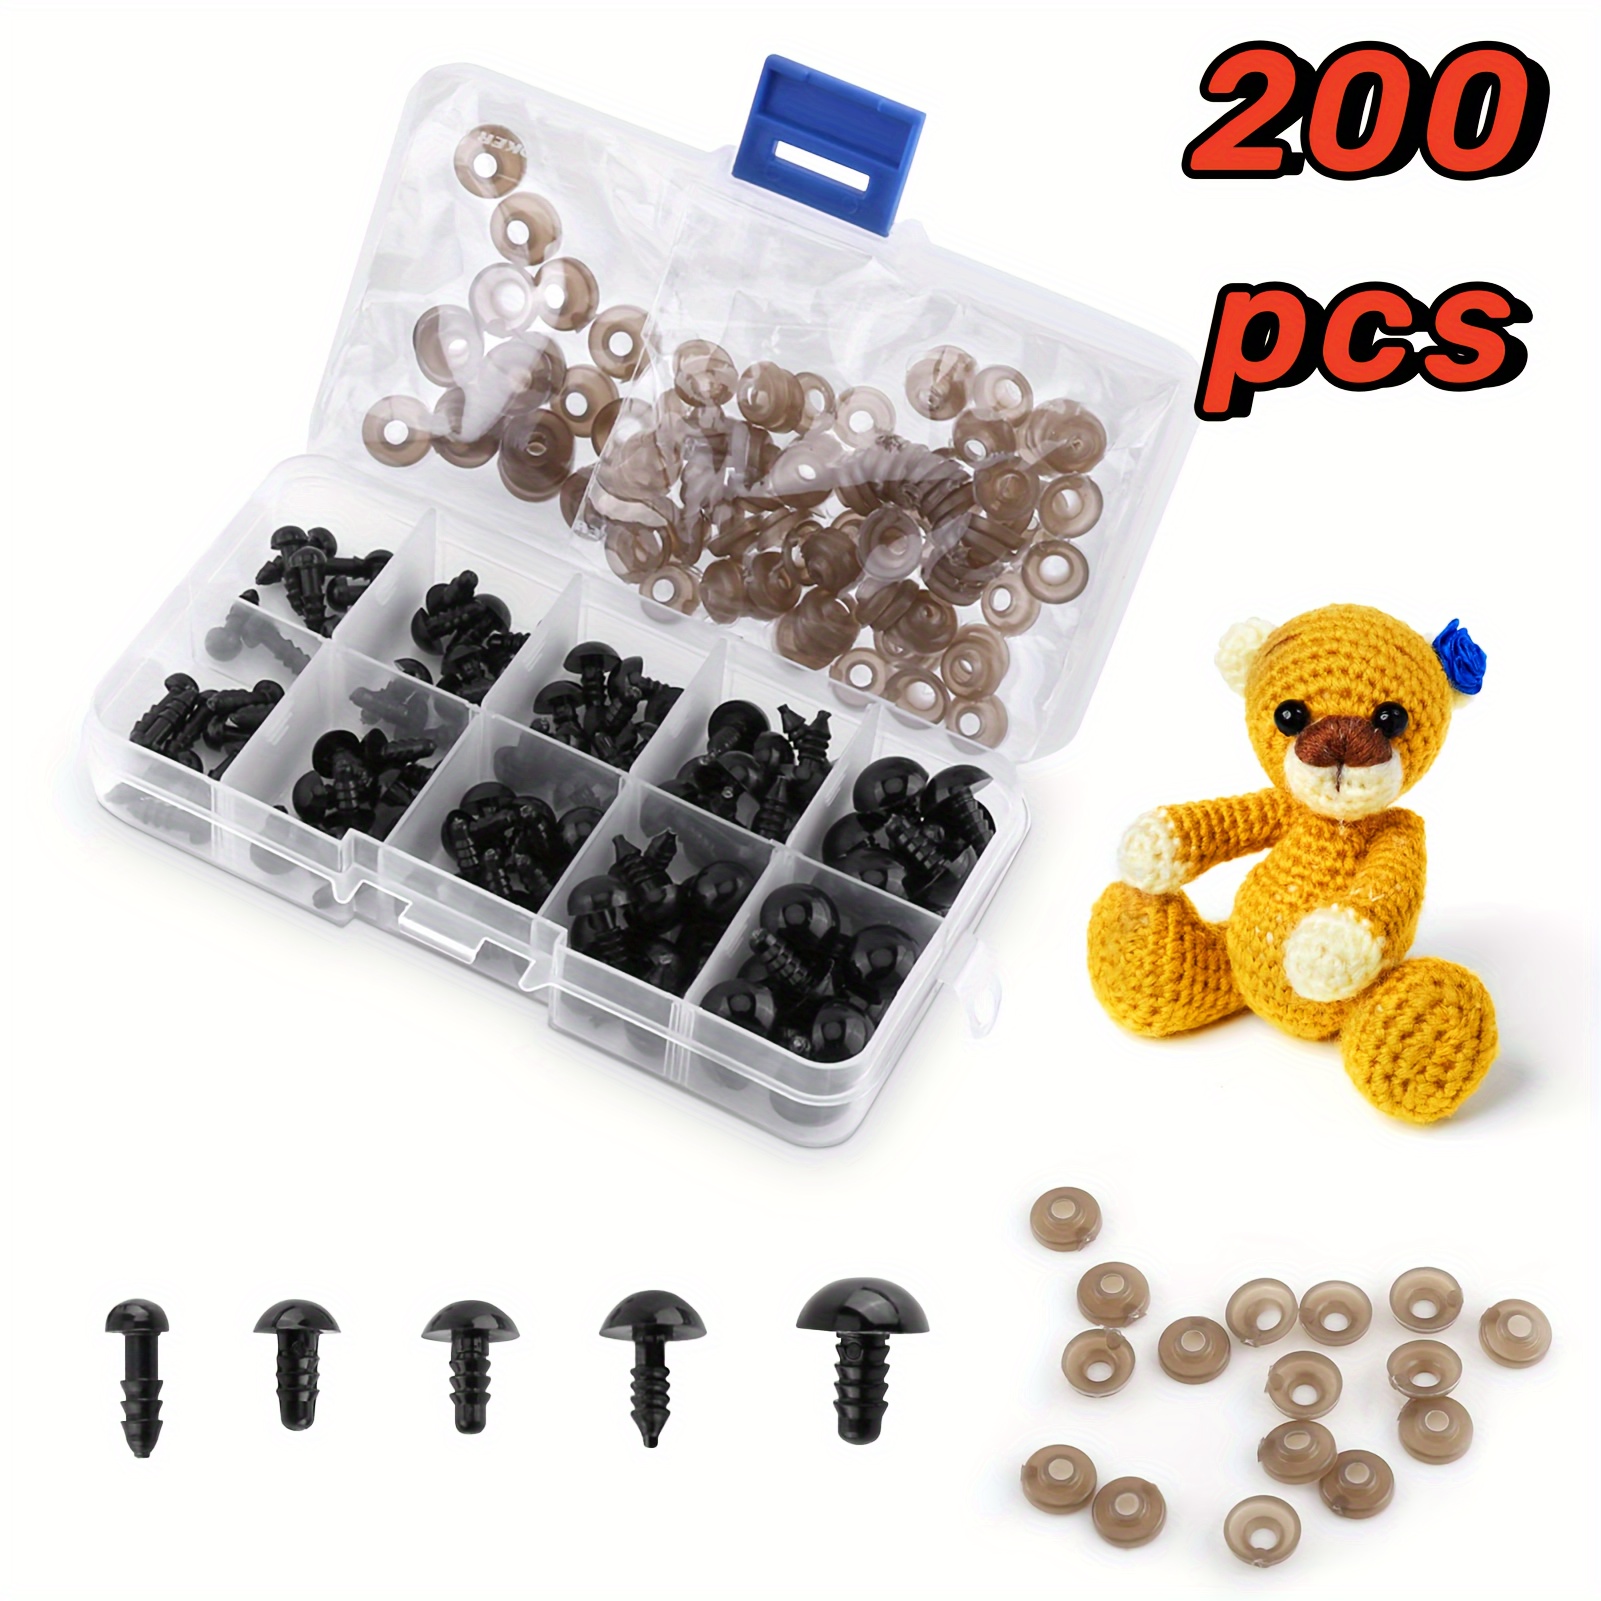 

200pcs Plastic Safety Eyes For Crafts And Amigurumi, Black, Suitable For Ages 14 And Above - Assorted Sizes For Diy Toy Making And Teddy Bear Supplies